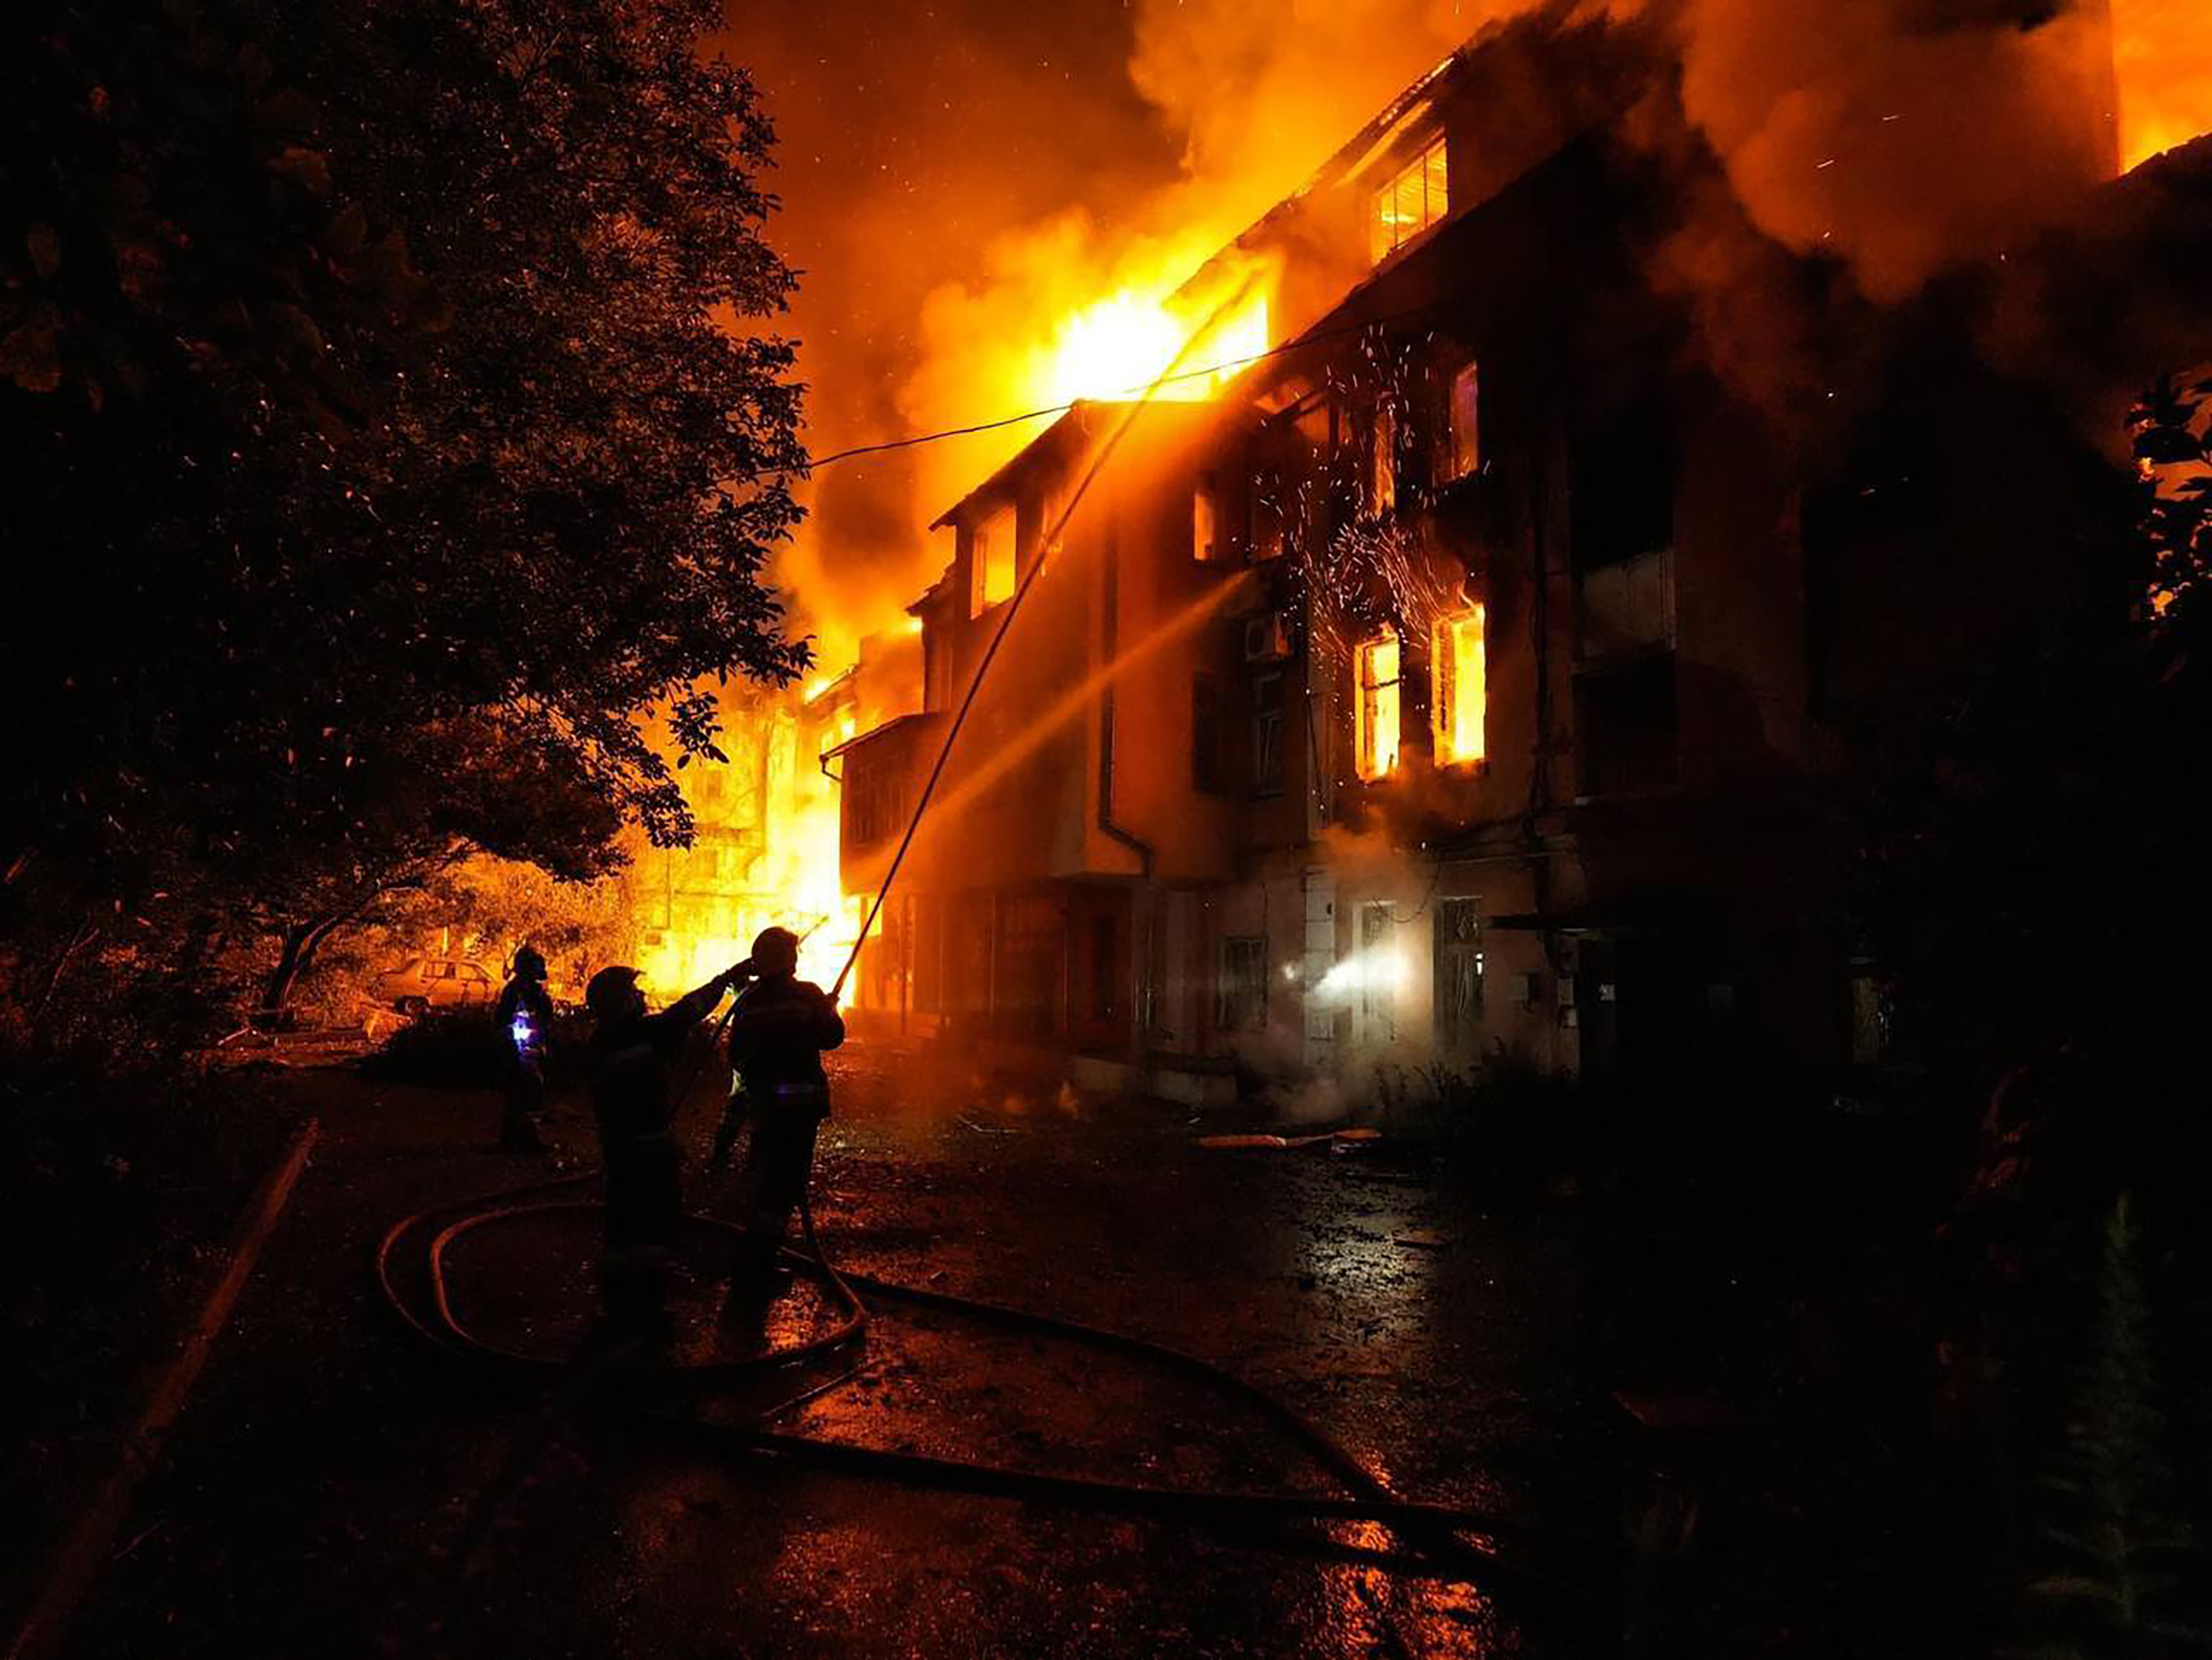 Firefighters extinguish a fire at a damaged house after attacks in Odesa, Ukraine, on July 19.